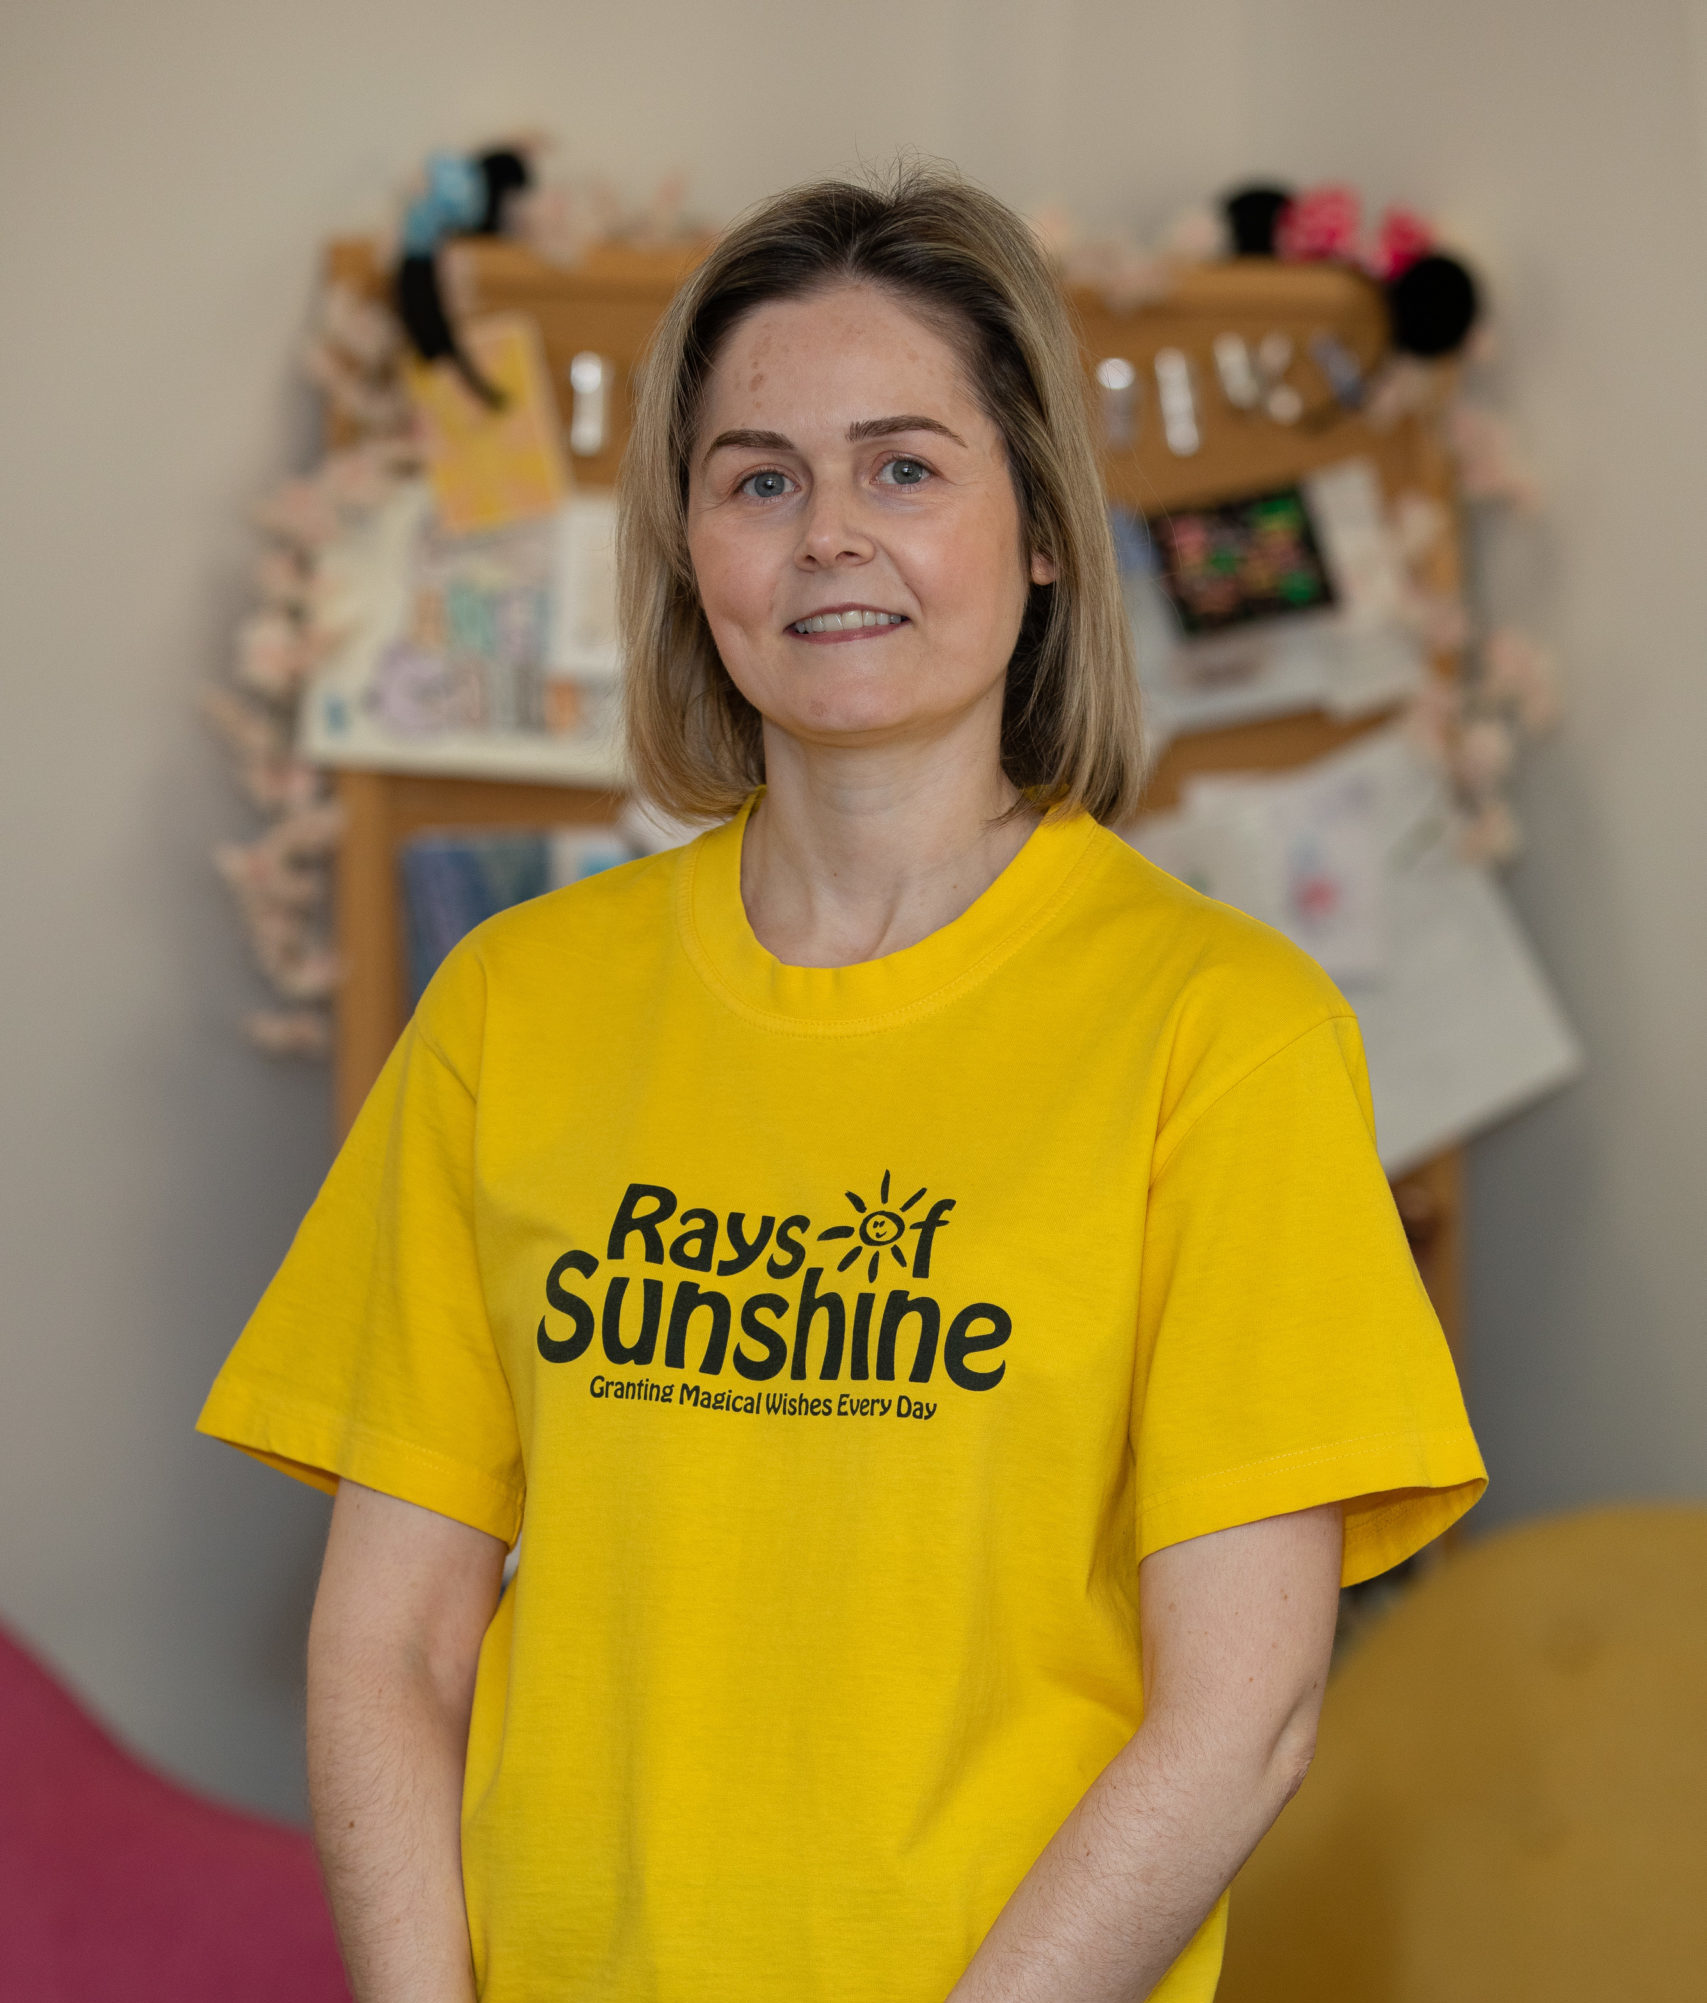 Sarah is wearing a yellow Rays of Sunshine t-shirt. She is standing.